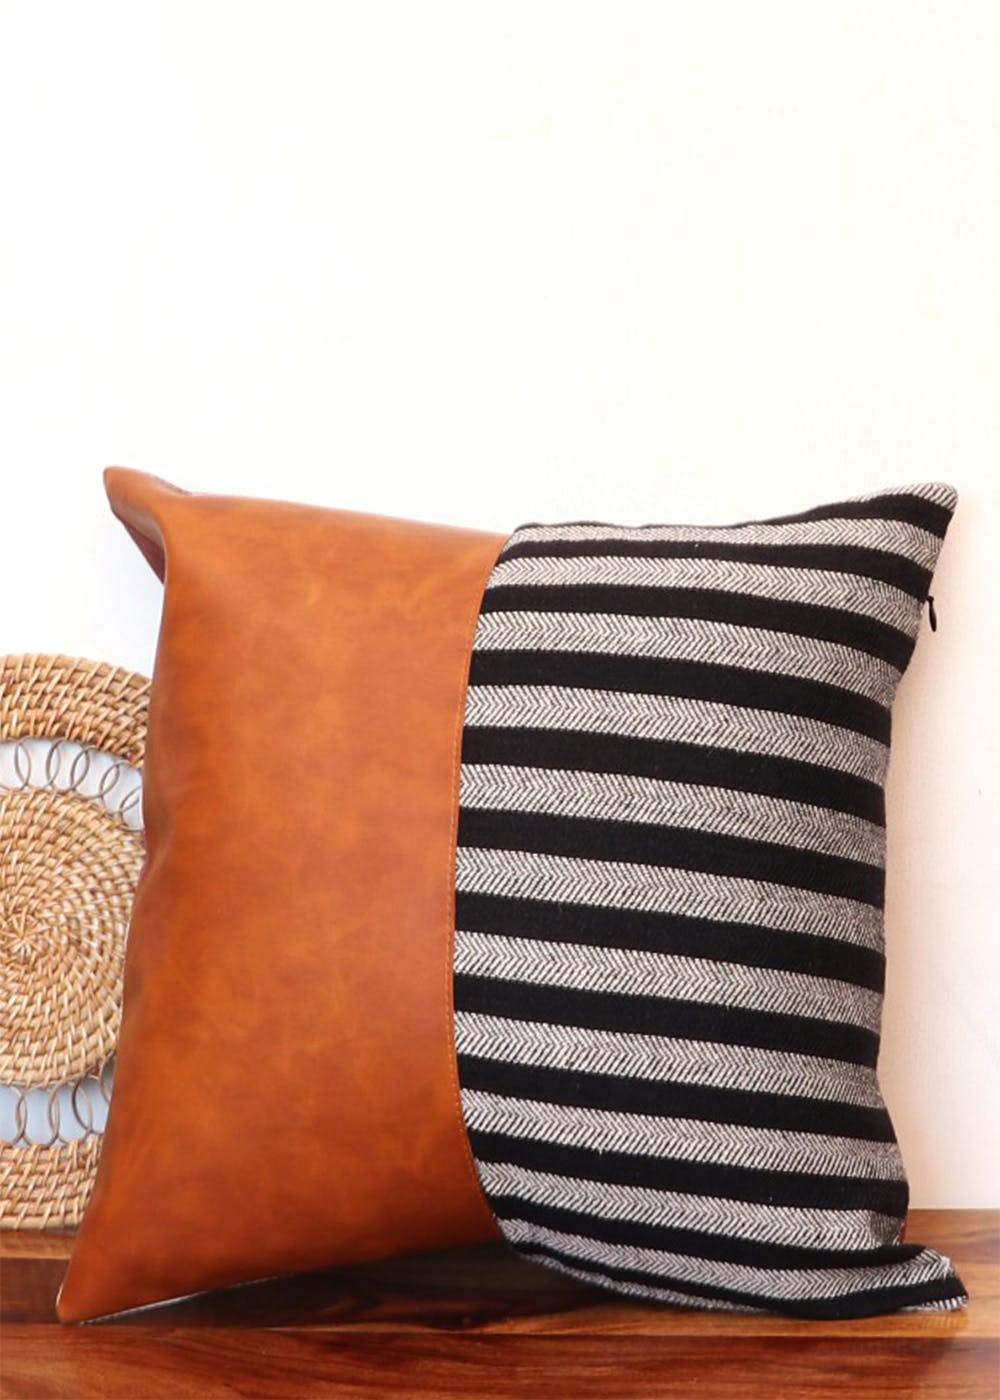 Get Half And Half Stripe Pattern Cushion Cover at ₹ 999 | LBB Shop